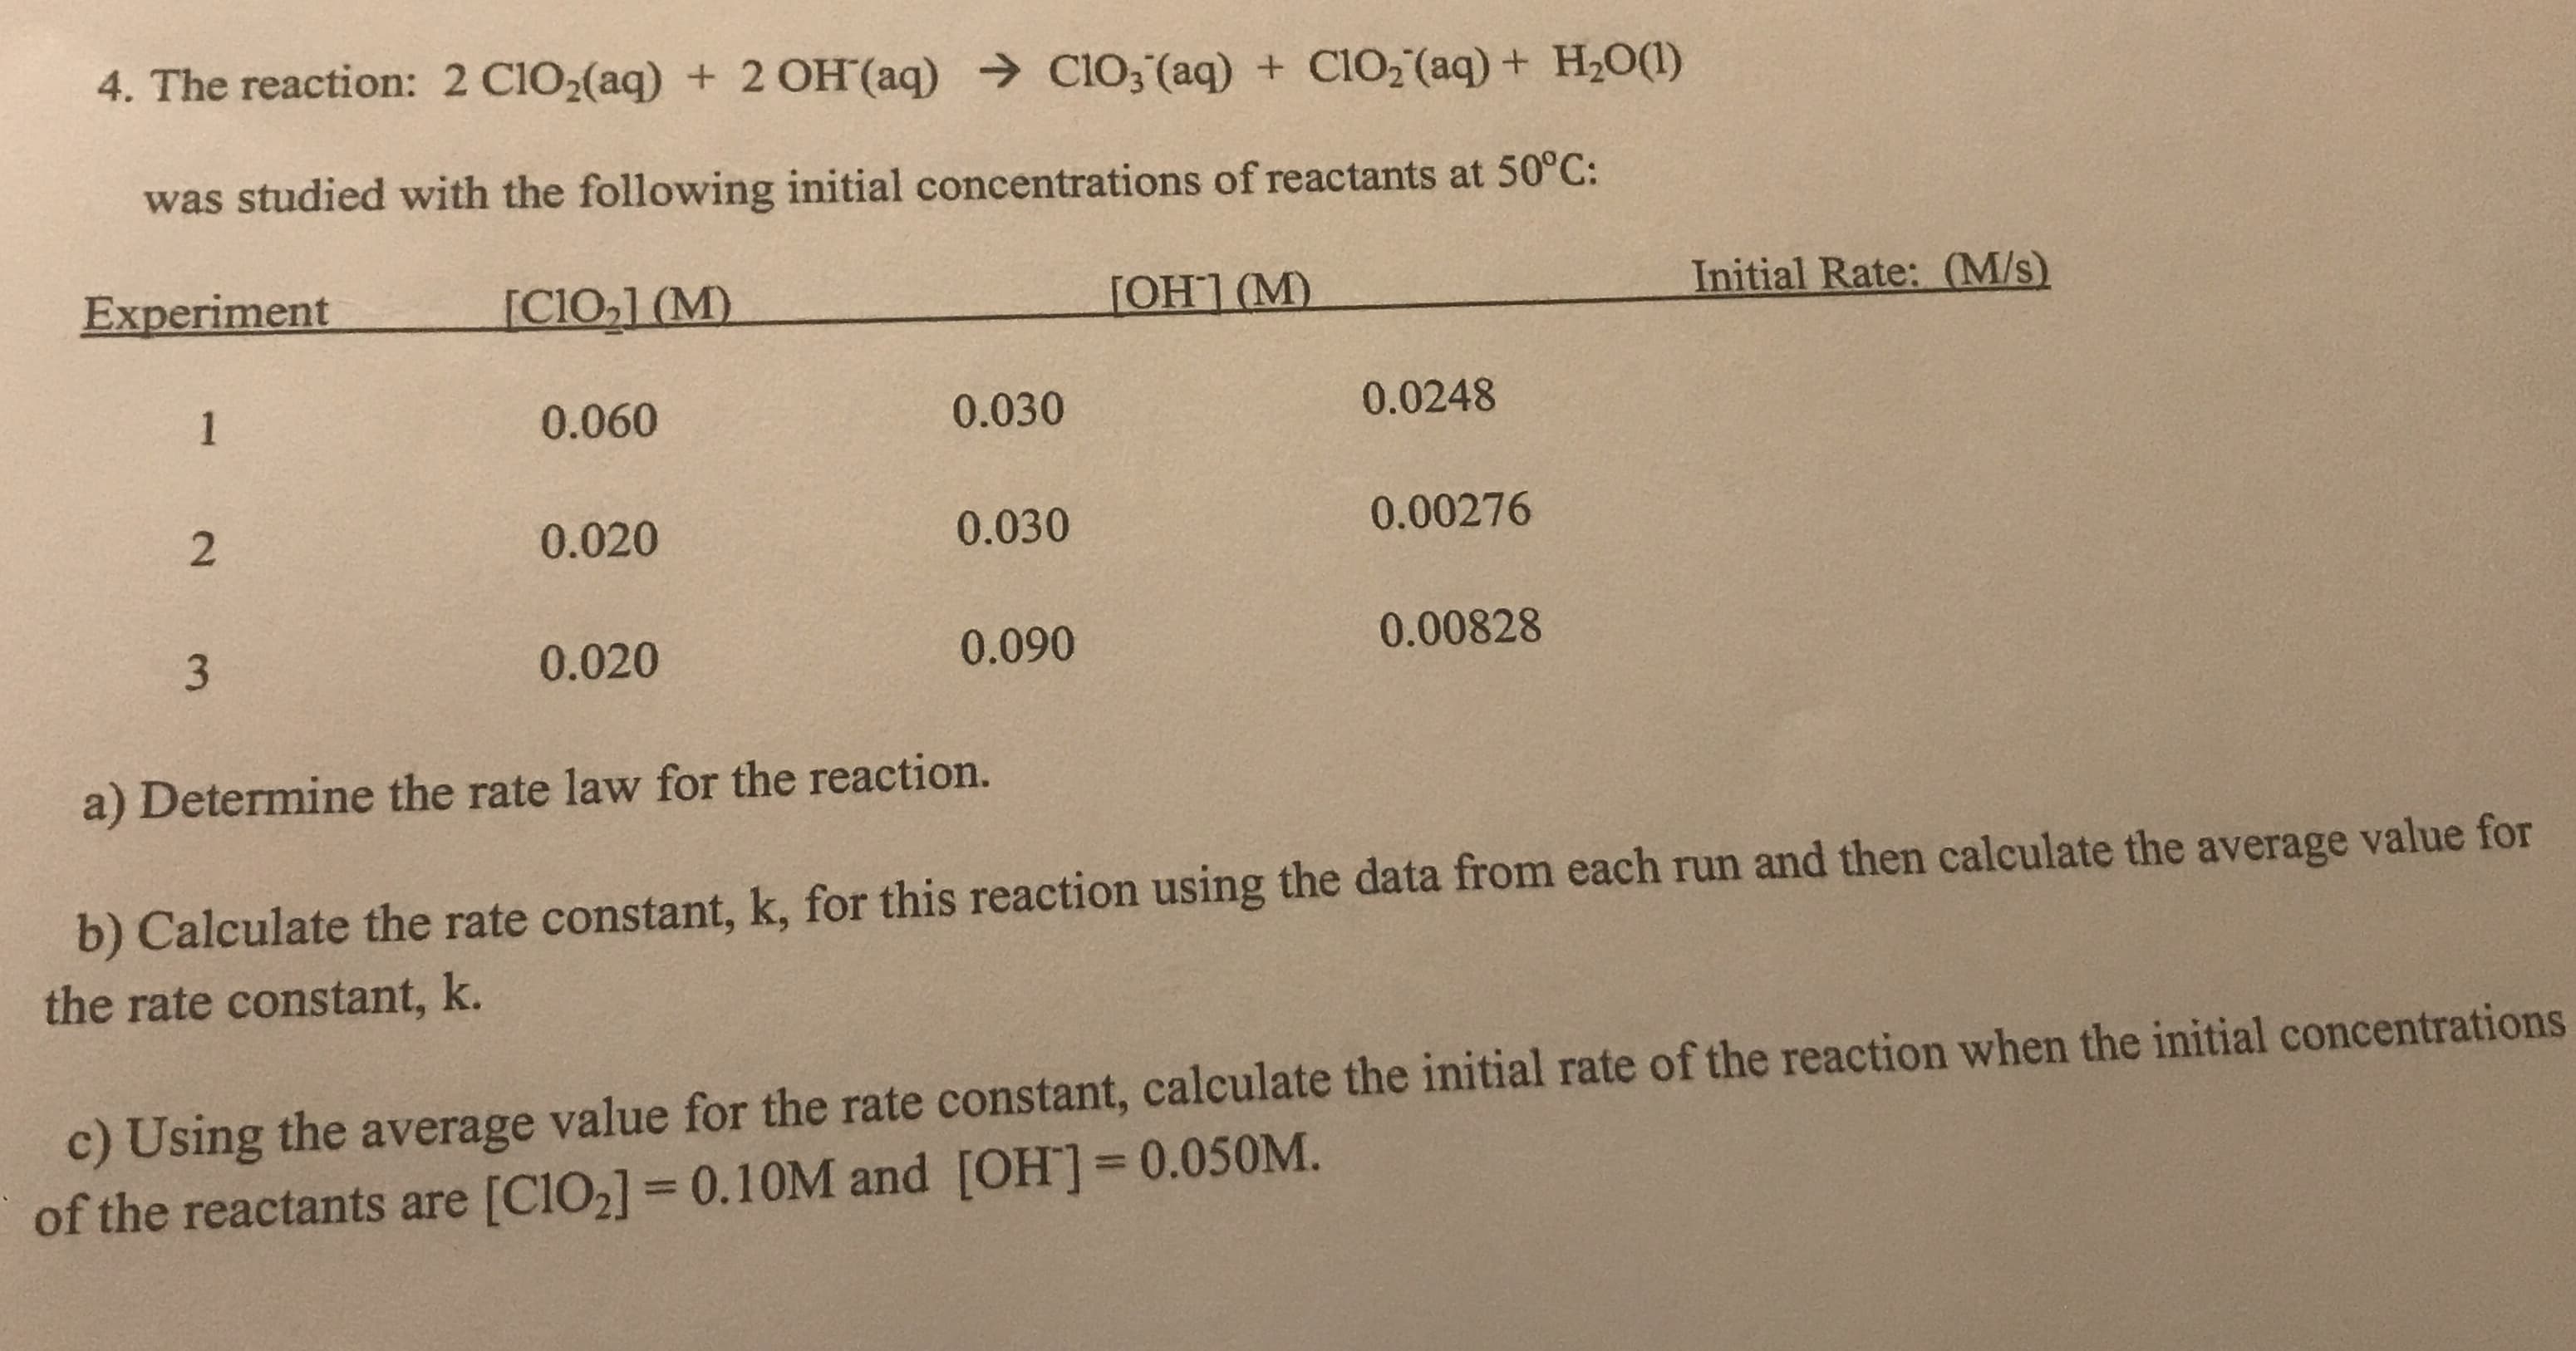 4. The reaction: 2 C1O2(aq) + 2 OH (aq) Cl03 (aq) + ClO, (aq) + H20(1)
was studied with the following initial concentrations of reactants at 50°C:
Experiment
[CIO,1 (M)
[OH1 (M)
Initial Rate: (M/s)
1
0.060
0.030
0.0248
0.020
0.030
0.00276
0.020
0.090
0.00828
a) Determine the rate law for the reaction.
b) Calculate the rate constant, k, for this reaction using the data from each run and then calculate the average value for
the rate constant, k.
c) Using the average value for the rate constant, calculate the initial rate of the reaction when the initial concentrations
of the reactants are [C1O2] = 0.10M and [OH]30.050M.
%3D
2.
3.
